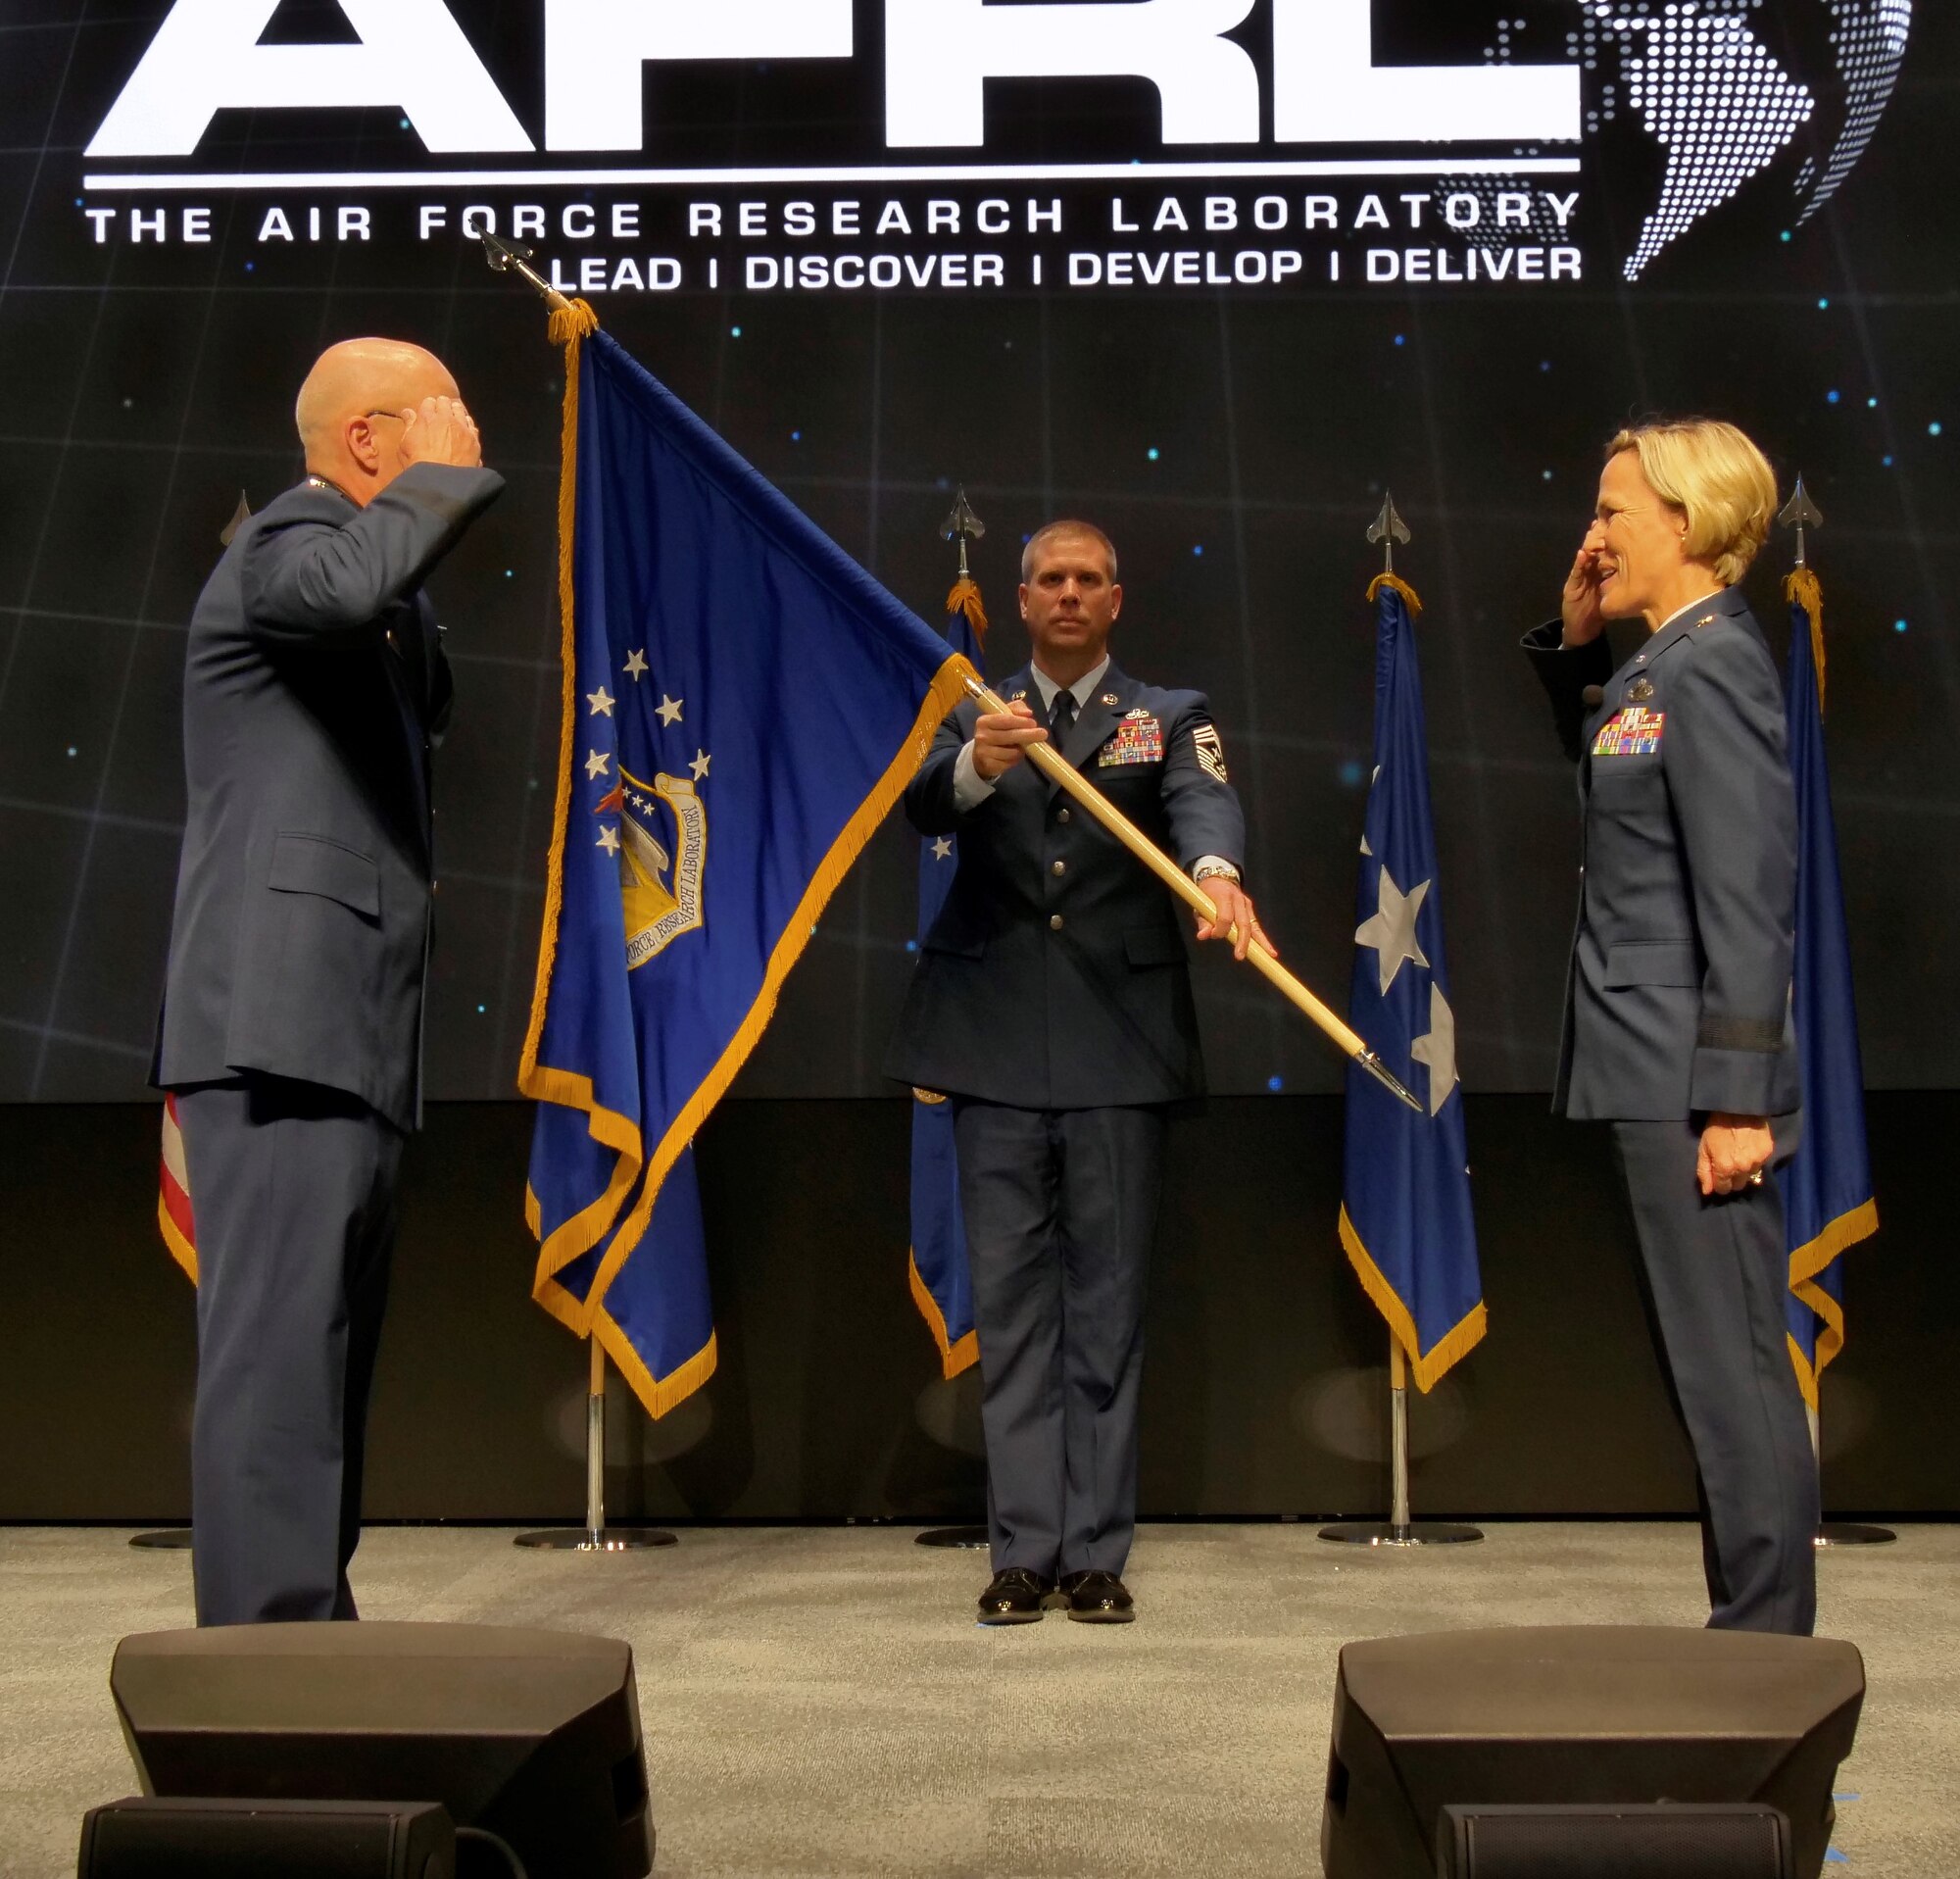 Brig. Gen. Heather L. Pringle assumes command of the Air Force Research Laboratory headquartered at Wright Patterson AFB, Ohio, from Gen. Arnold W. Bunch, commander, Air Force Materiel Command, during a ceremony June 18 at the Air Force Institute of Technology’s Kenney Hall Auditorium. The event was live-streamed on YouTube to support social distancing and allow the community to witness the ceremony. (U.S. Air Force Photo/Keith Lewis)